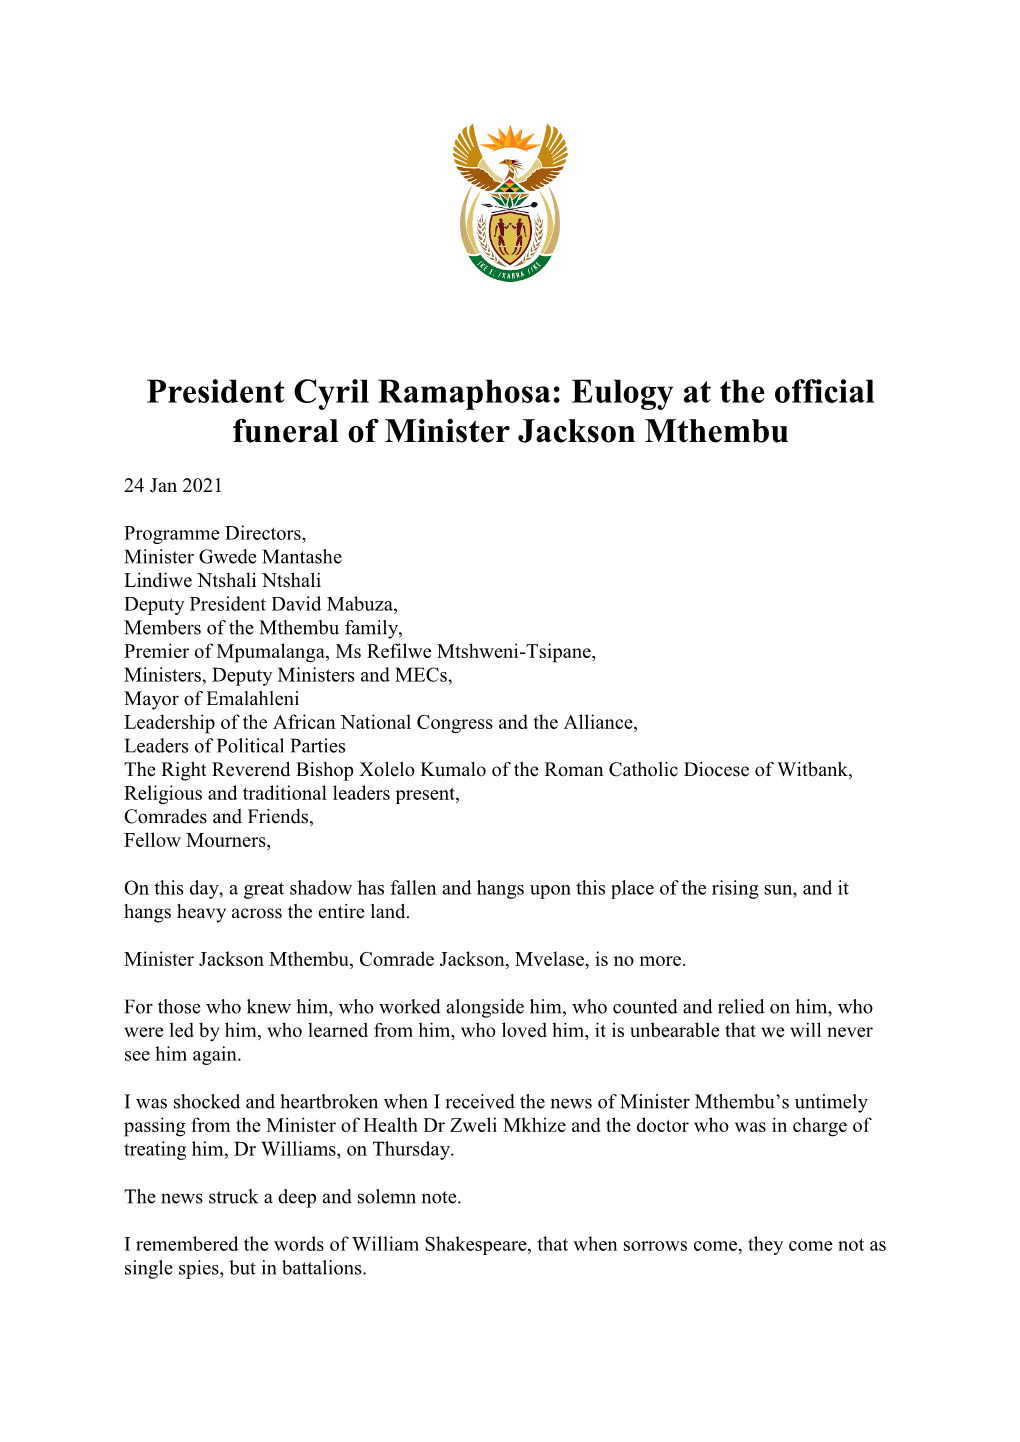 President Cyril Ramaphosa: Eulogy at the Official Funeral of Minister Jackson Mthembu